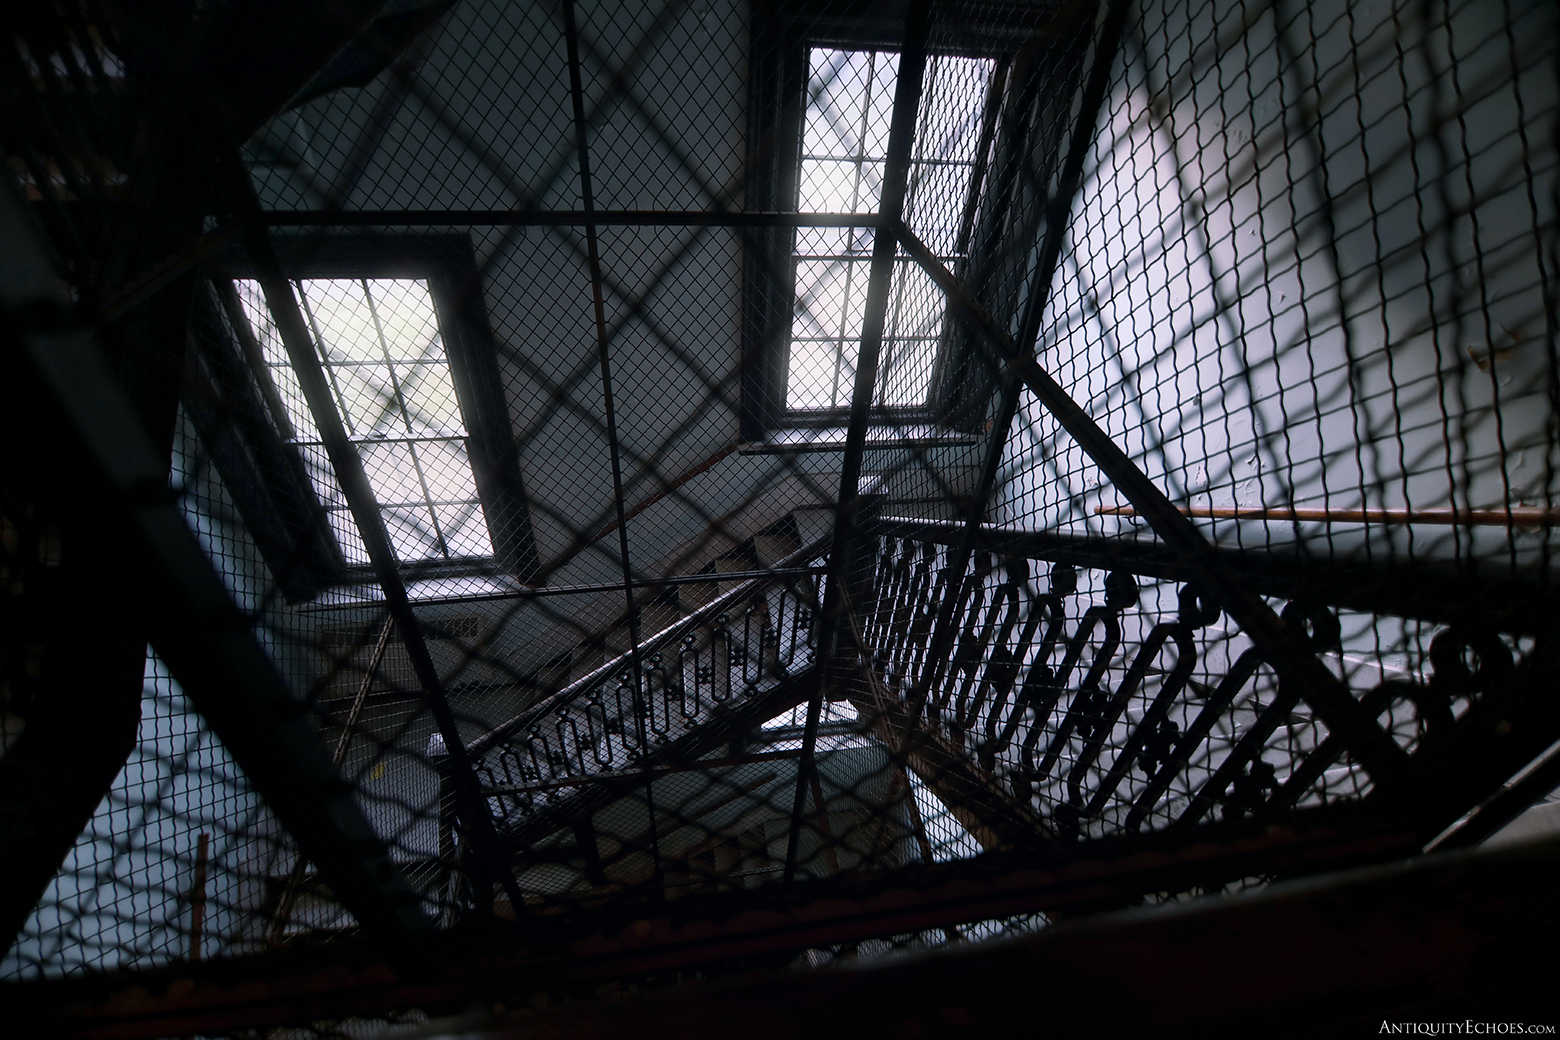 Allentown State Hospital - Caged Stairwell